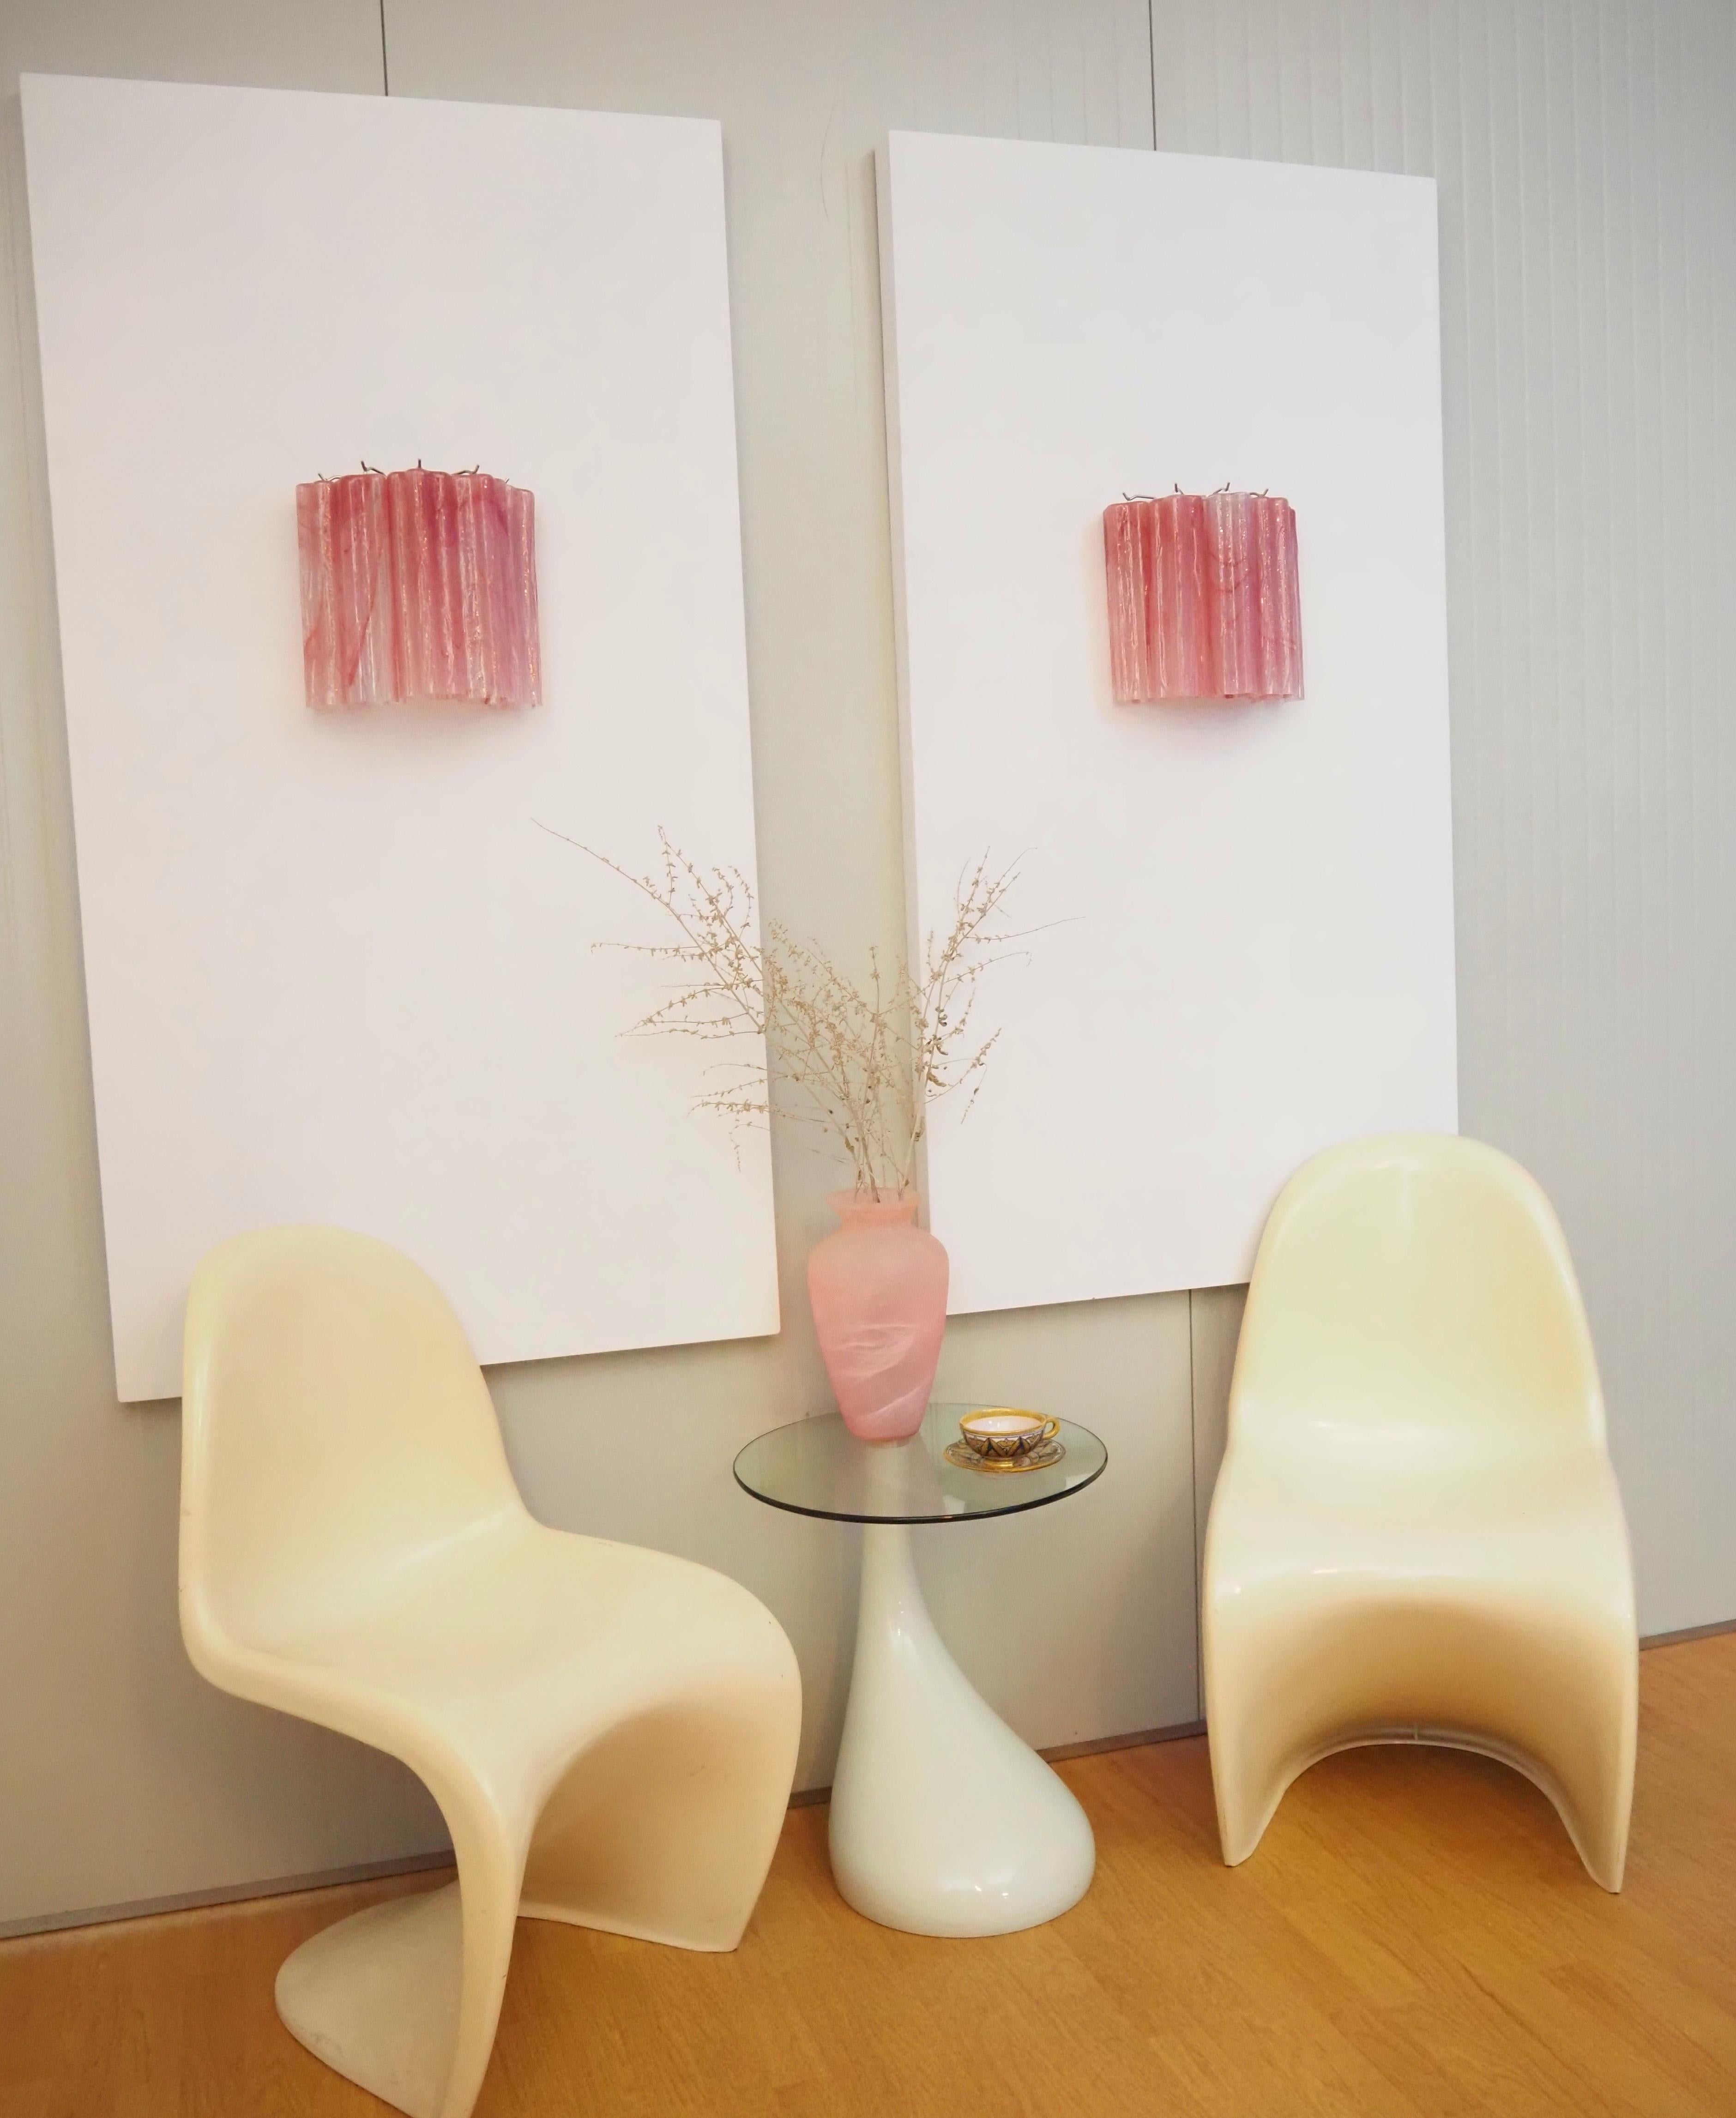 Mid-Century Modern Fantastic pair of Murano Glass Tube wall sconces - 5 pink alabaster glass tube